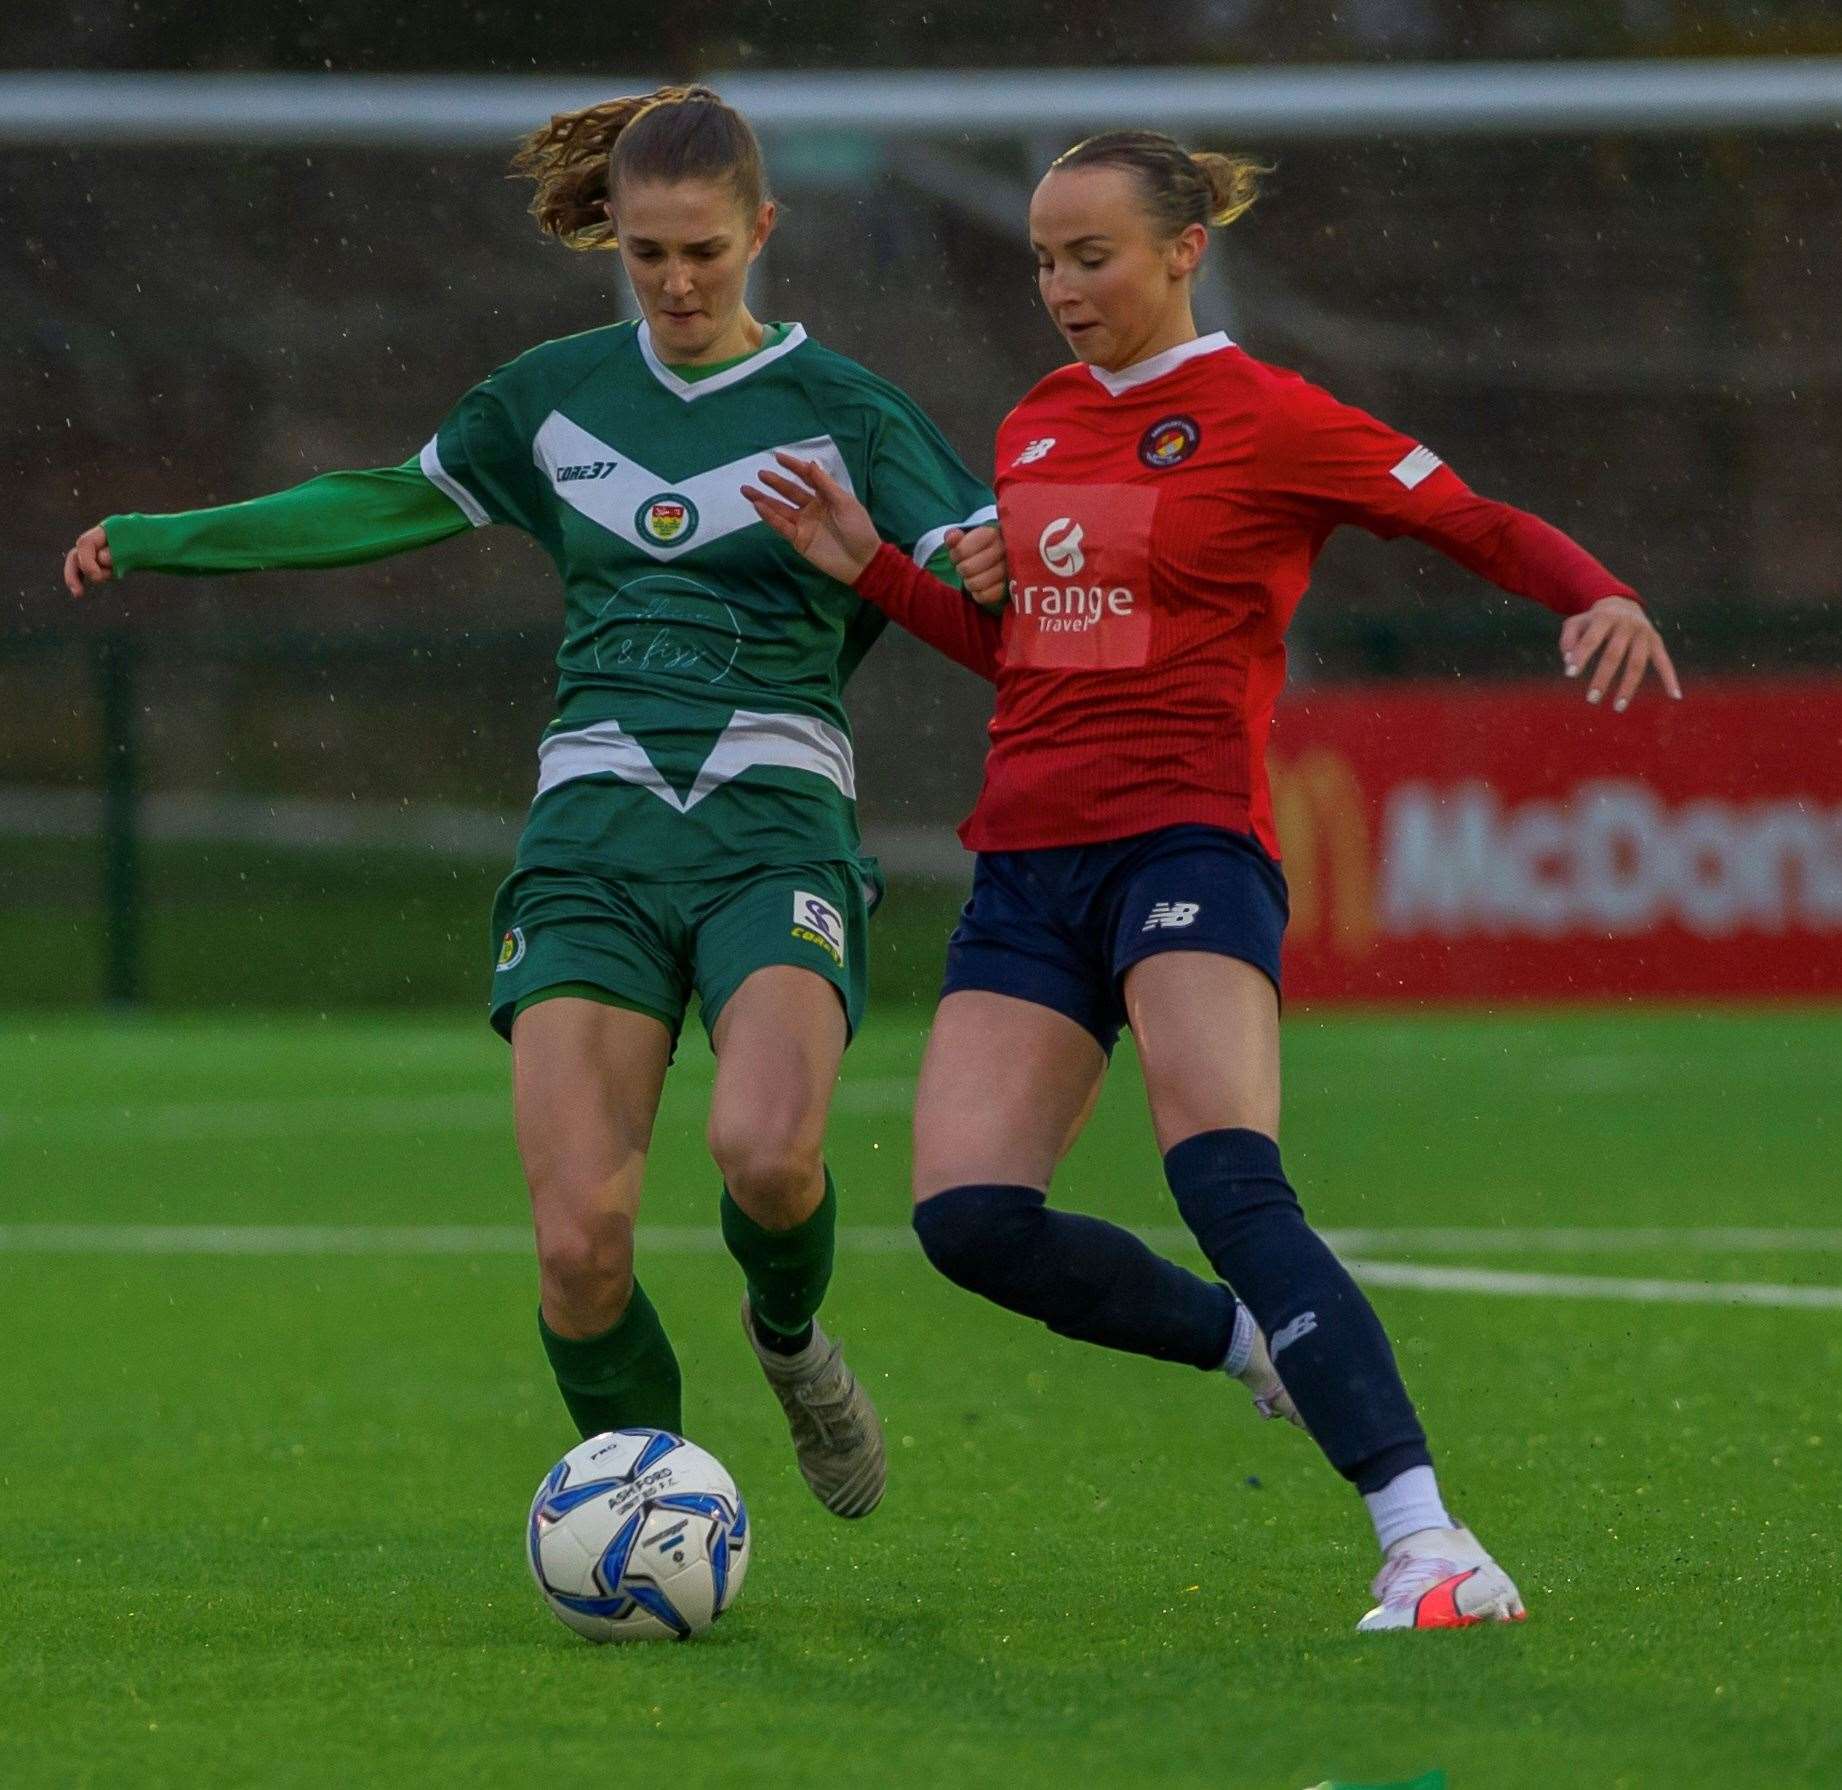 Action from Ashford Ladies’ narrow defeat by Ebbsfleet. Picture: Ian Scammell